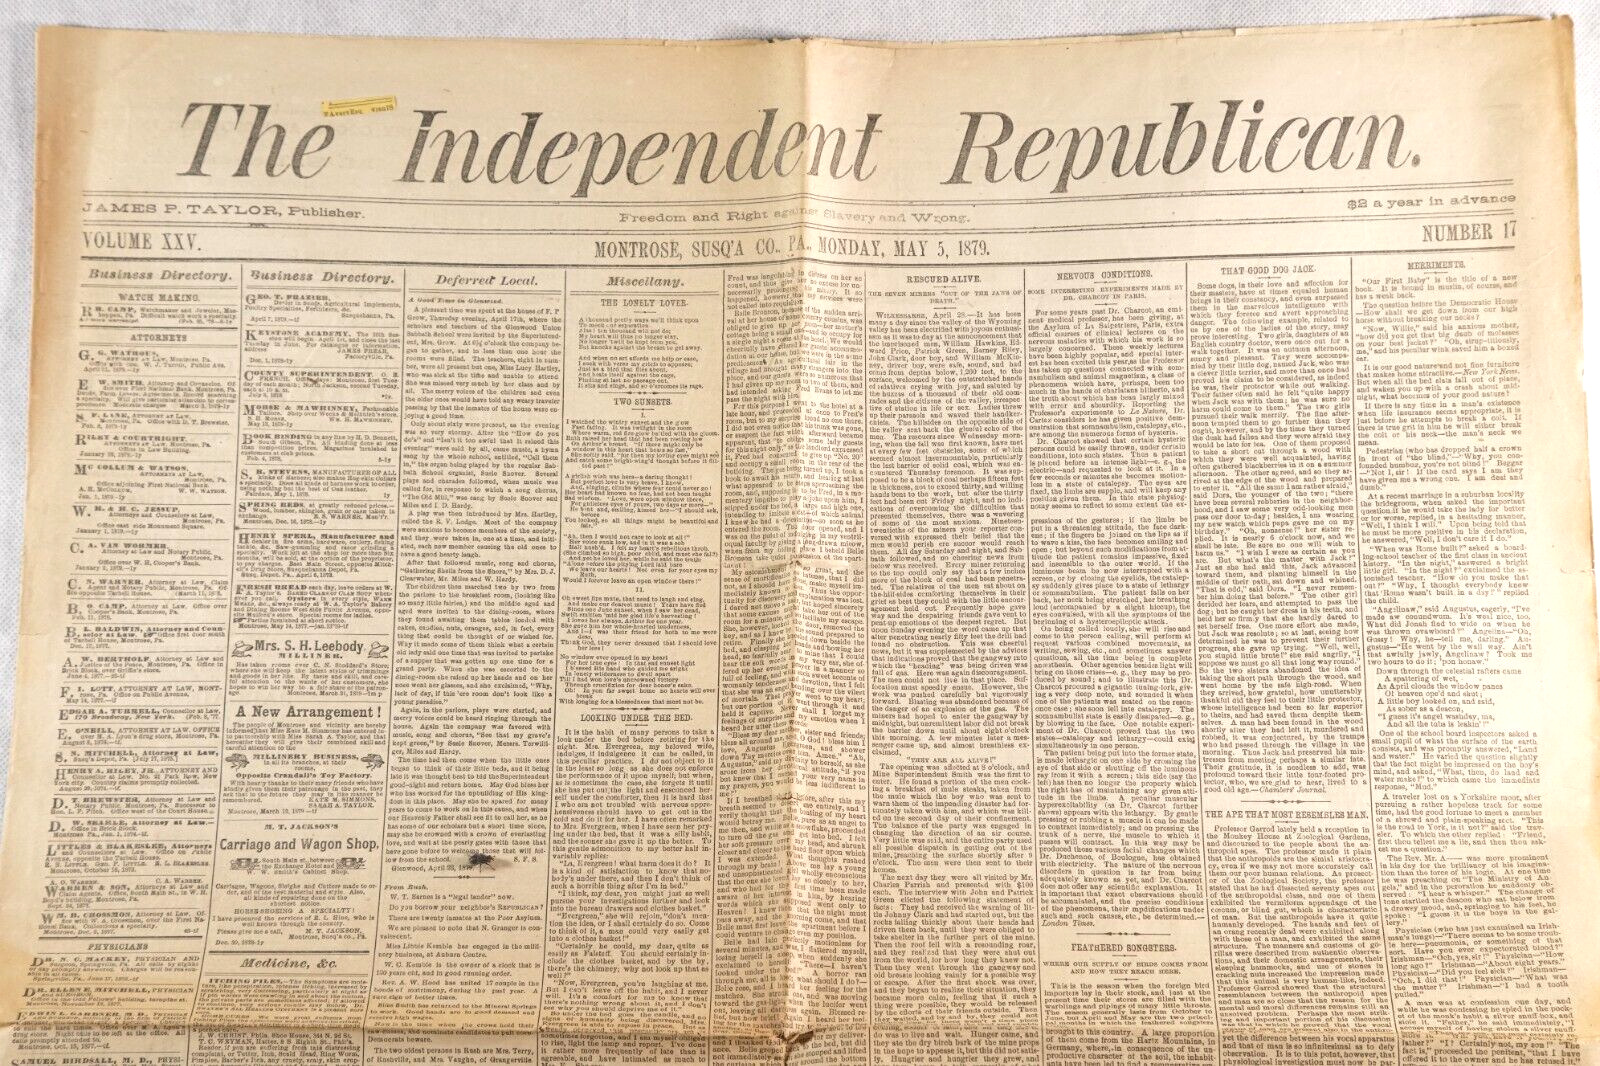 The Independent Republican May 5th 1879 Newspaper, Elgin Watch Advertisement